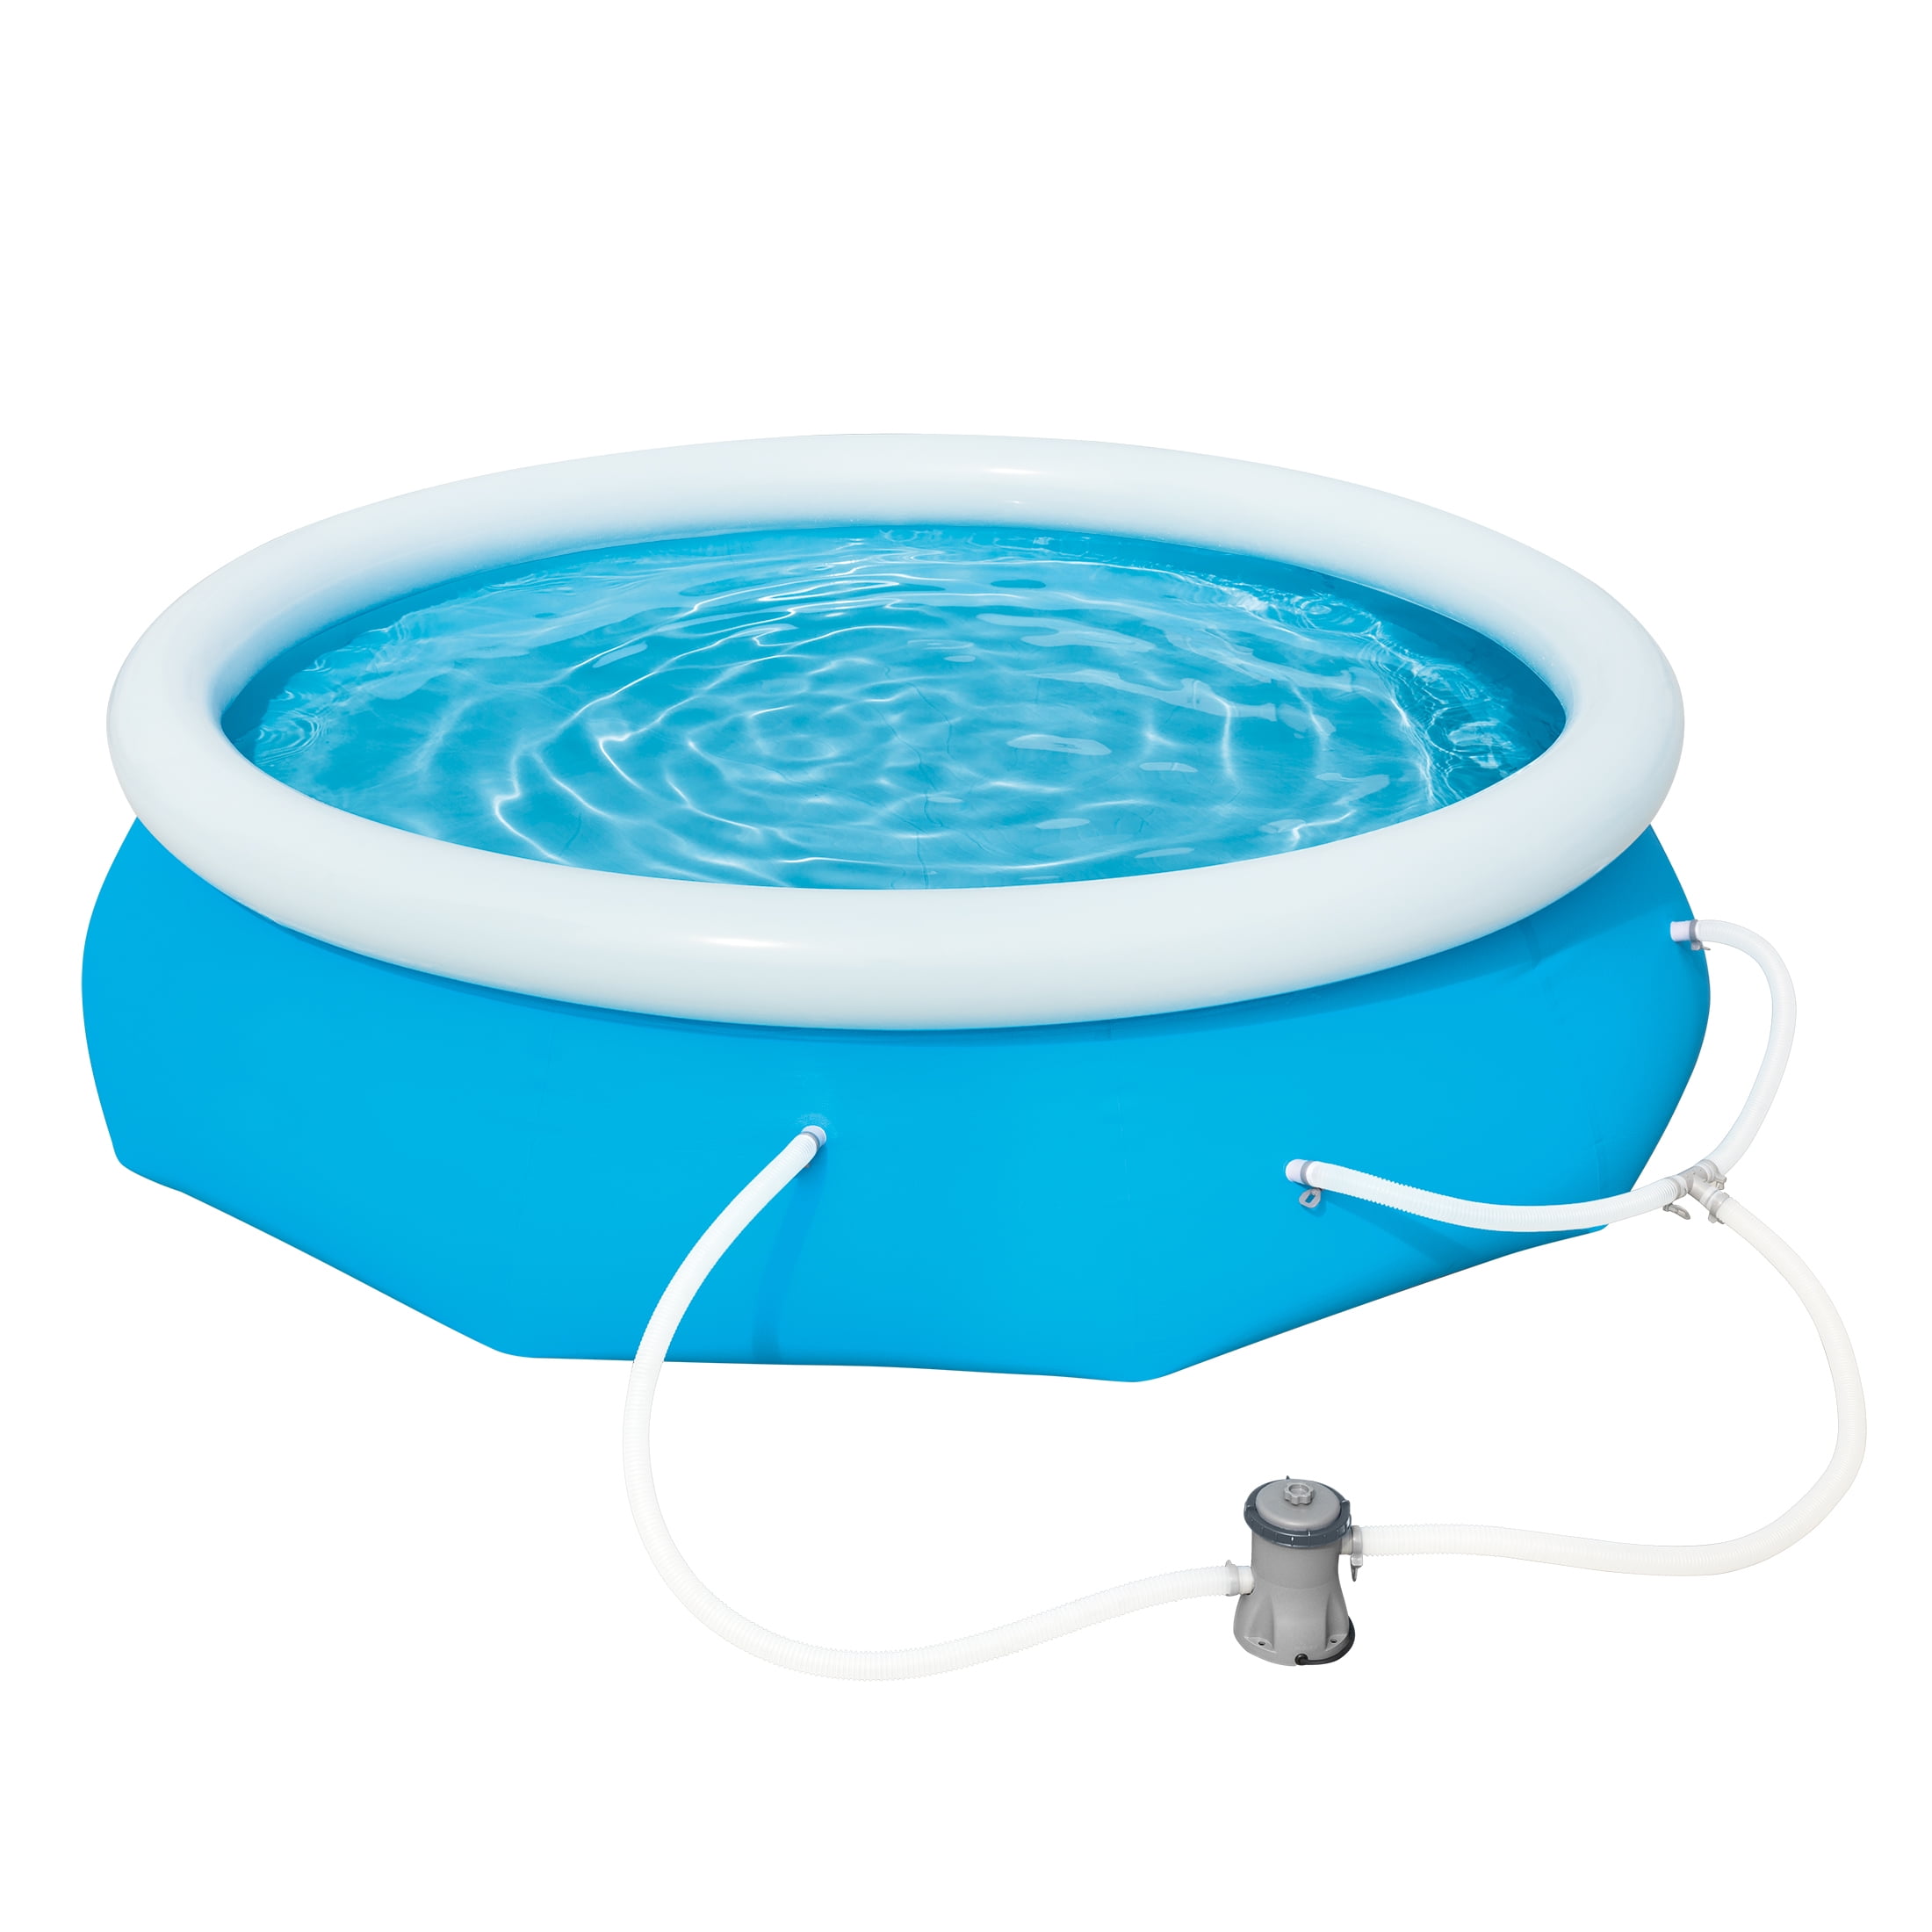 Bluescape Fast Set 10’ x 30” Round Inflatable Soft Sided Above Ground Pool Set